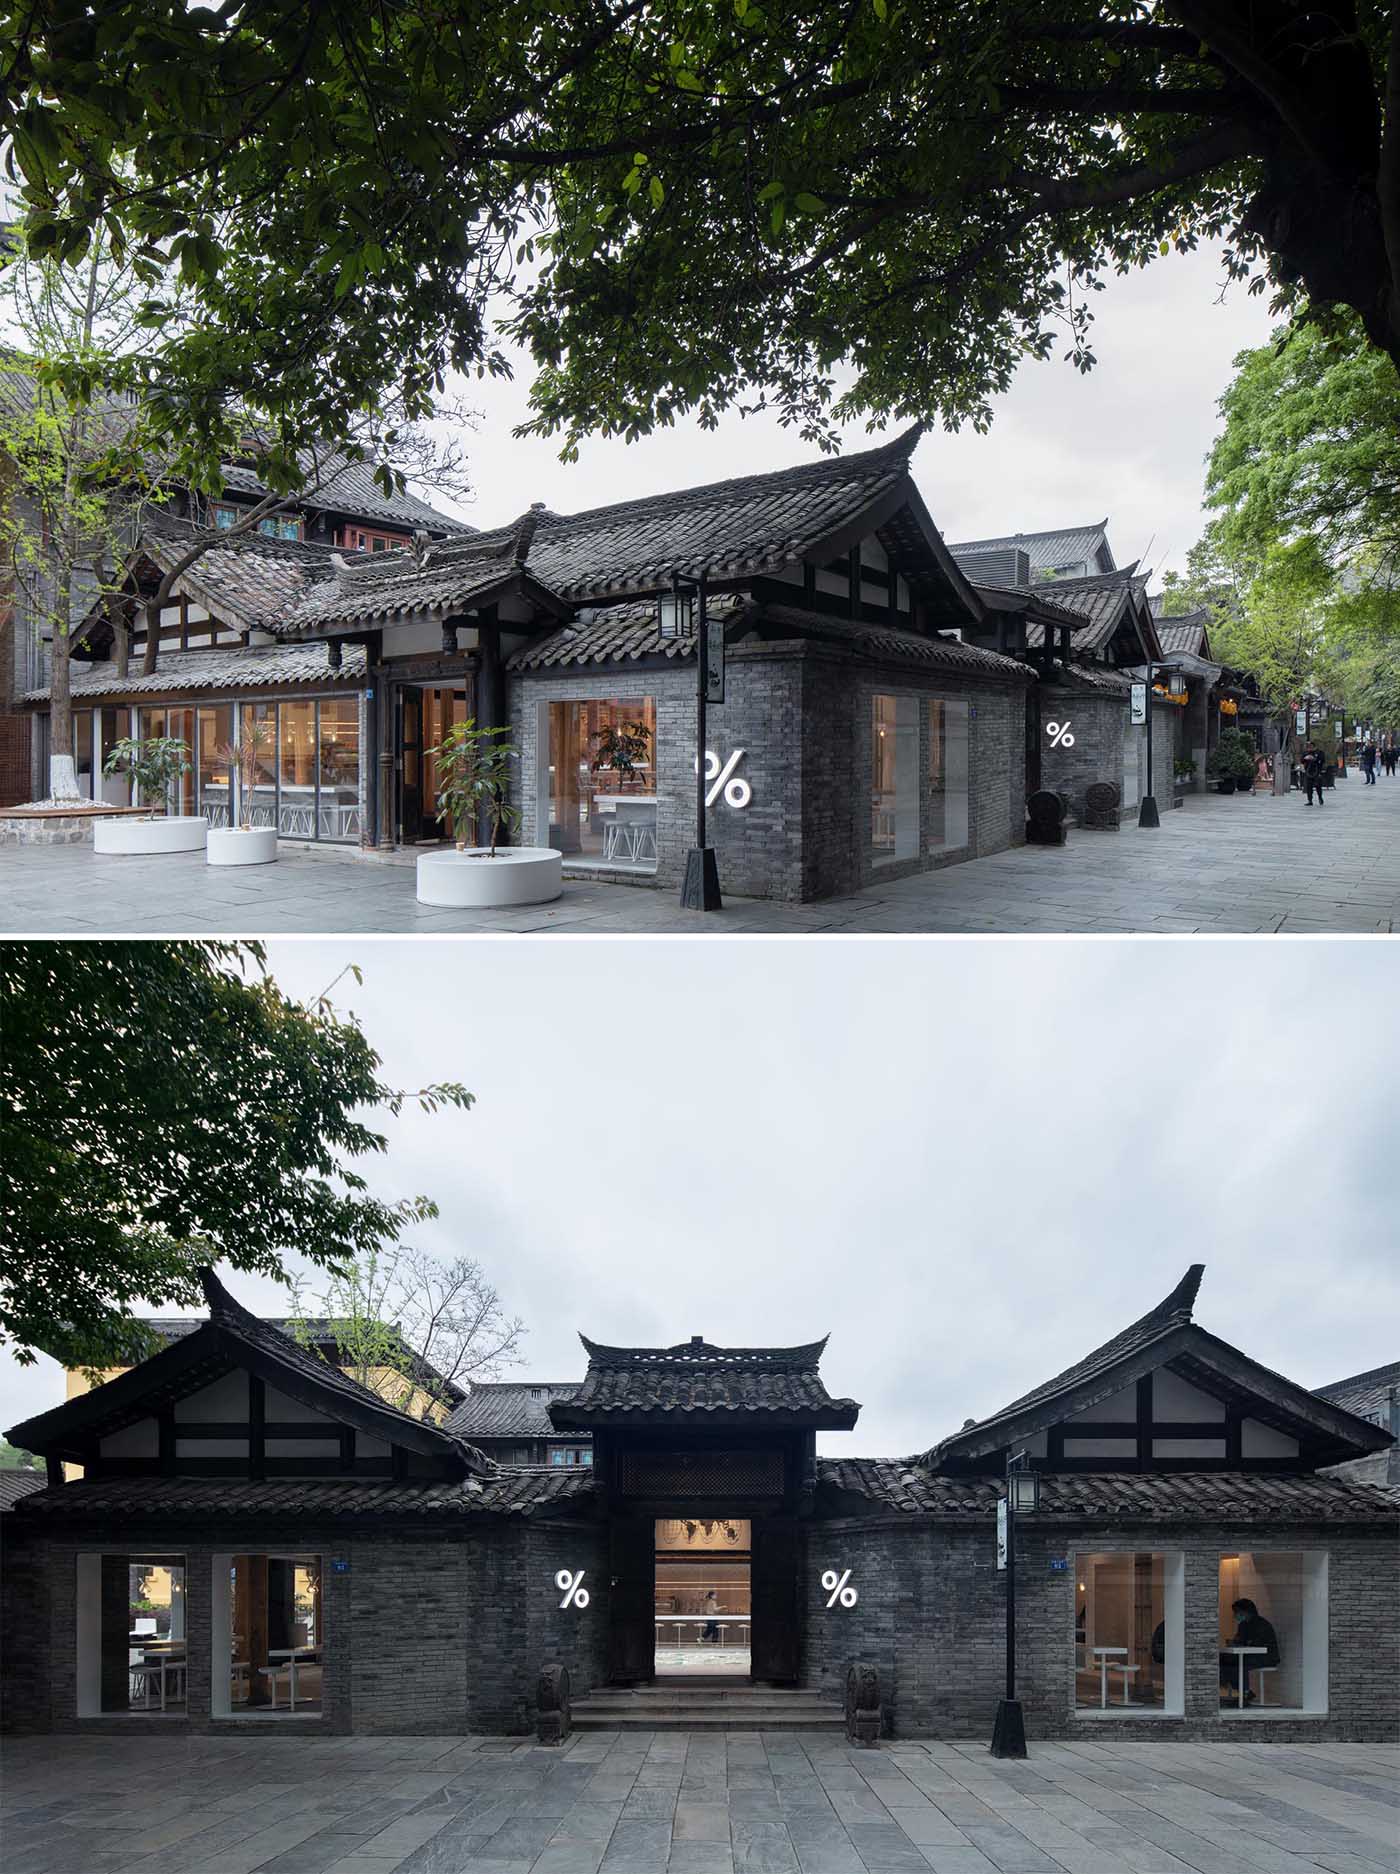 This modern coffee shop was built to respect the traditional western-Sichuan residential architecture.